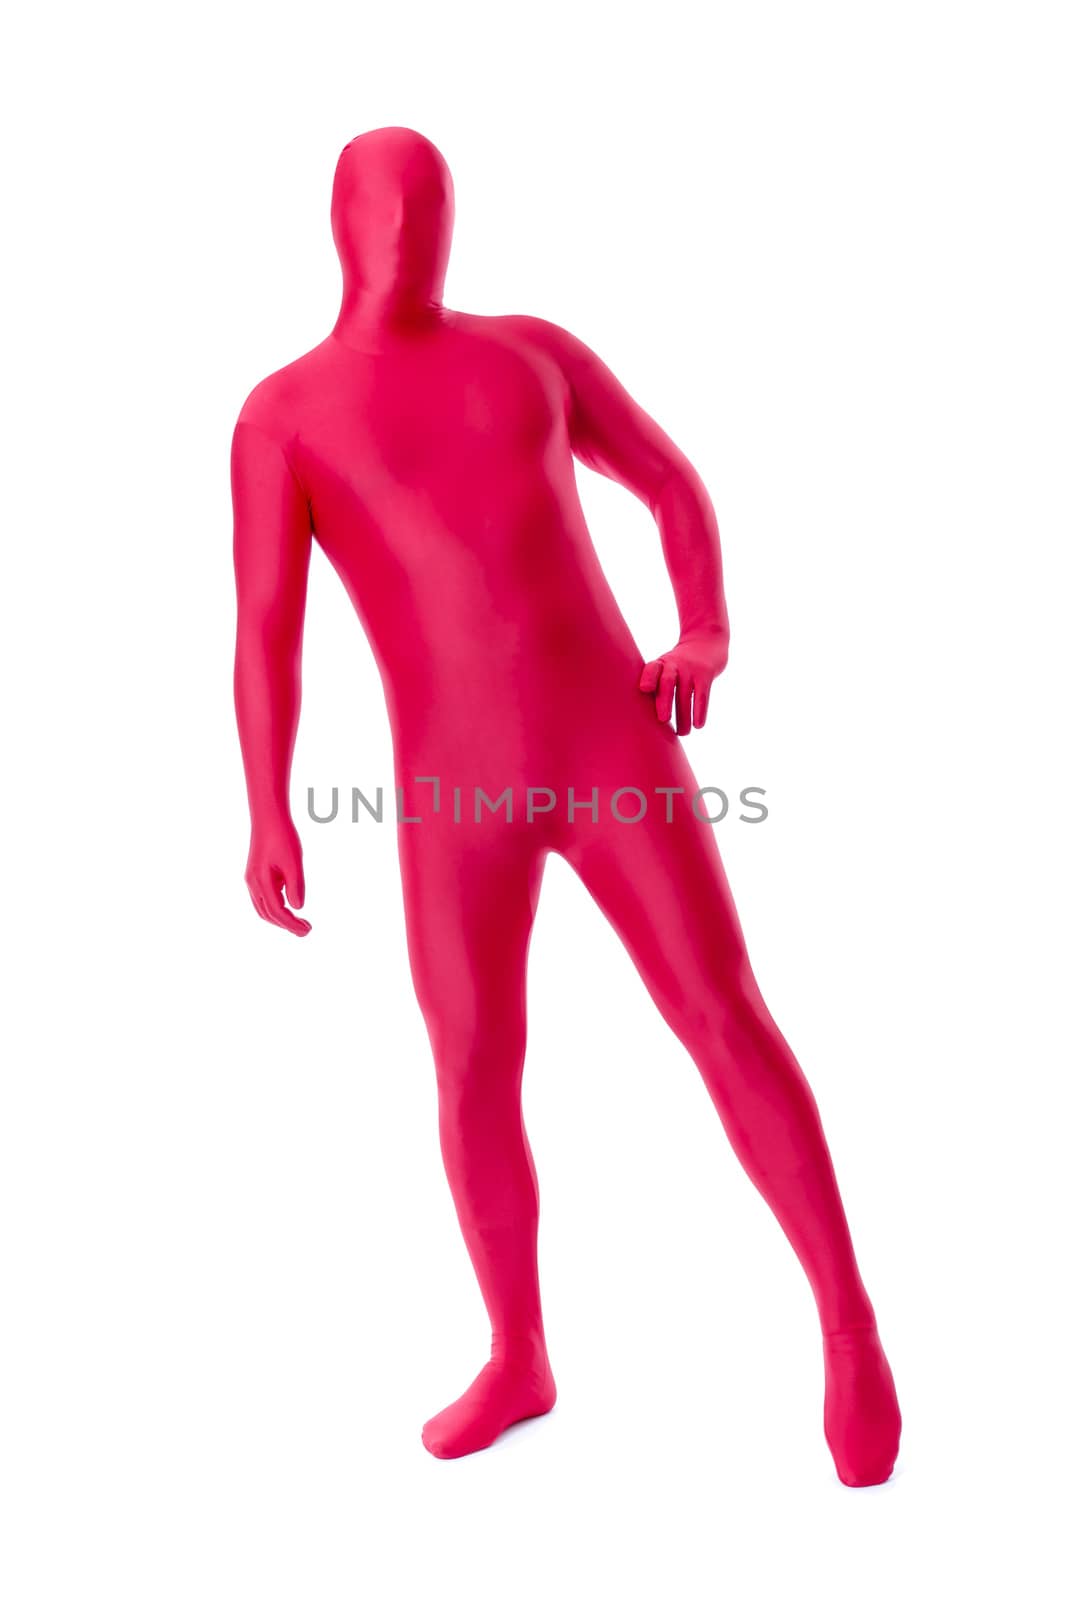 A handsome man in a red body suit isolated on a white background